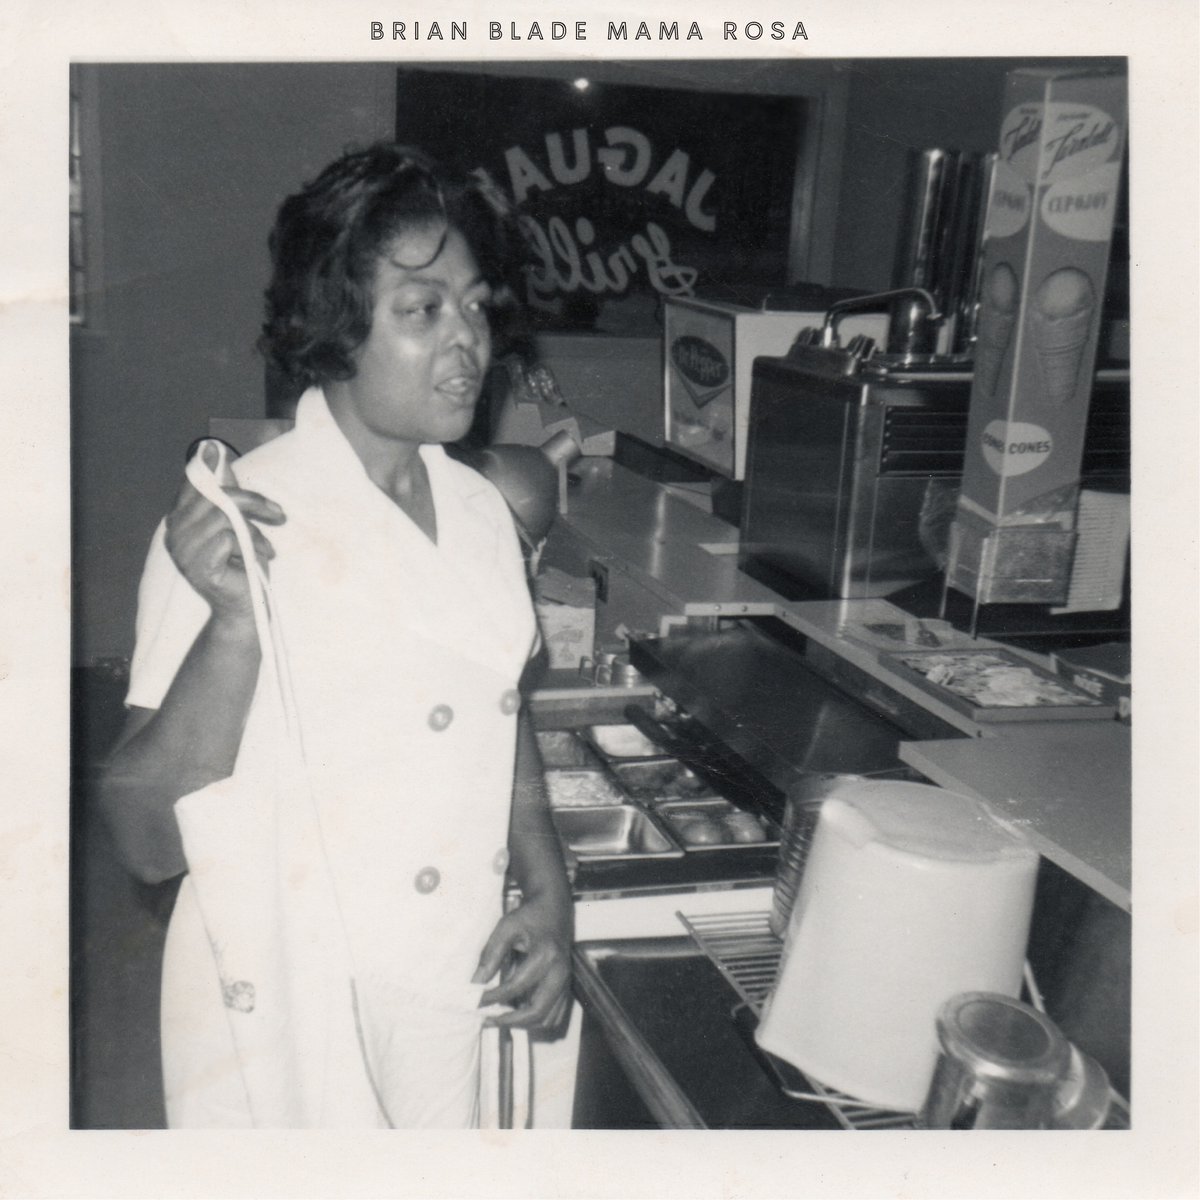 MAMA ROSA is now available. Please visit brianblade.com/mamarosa to order or stream